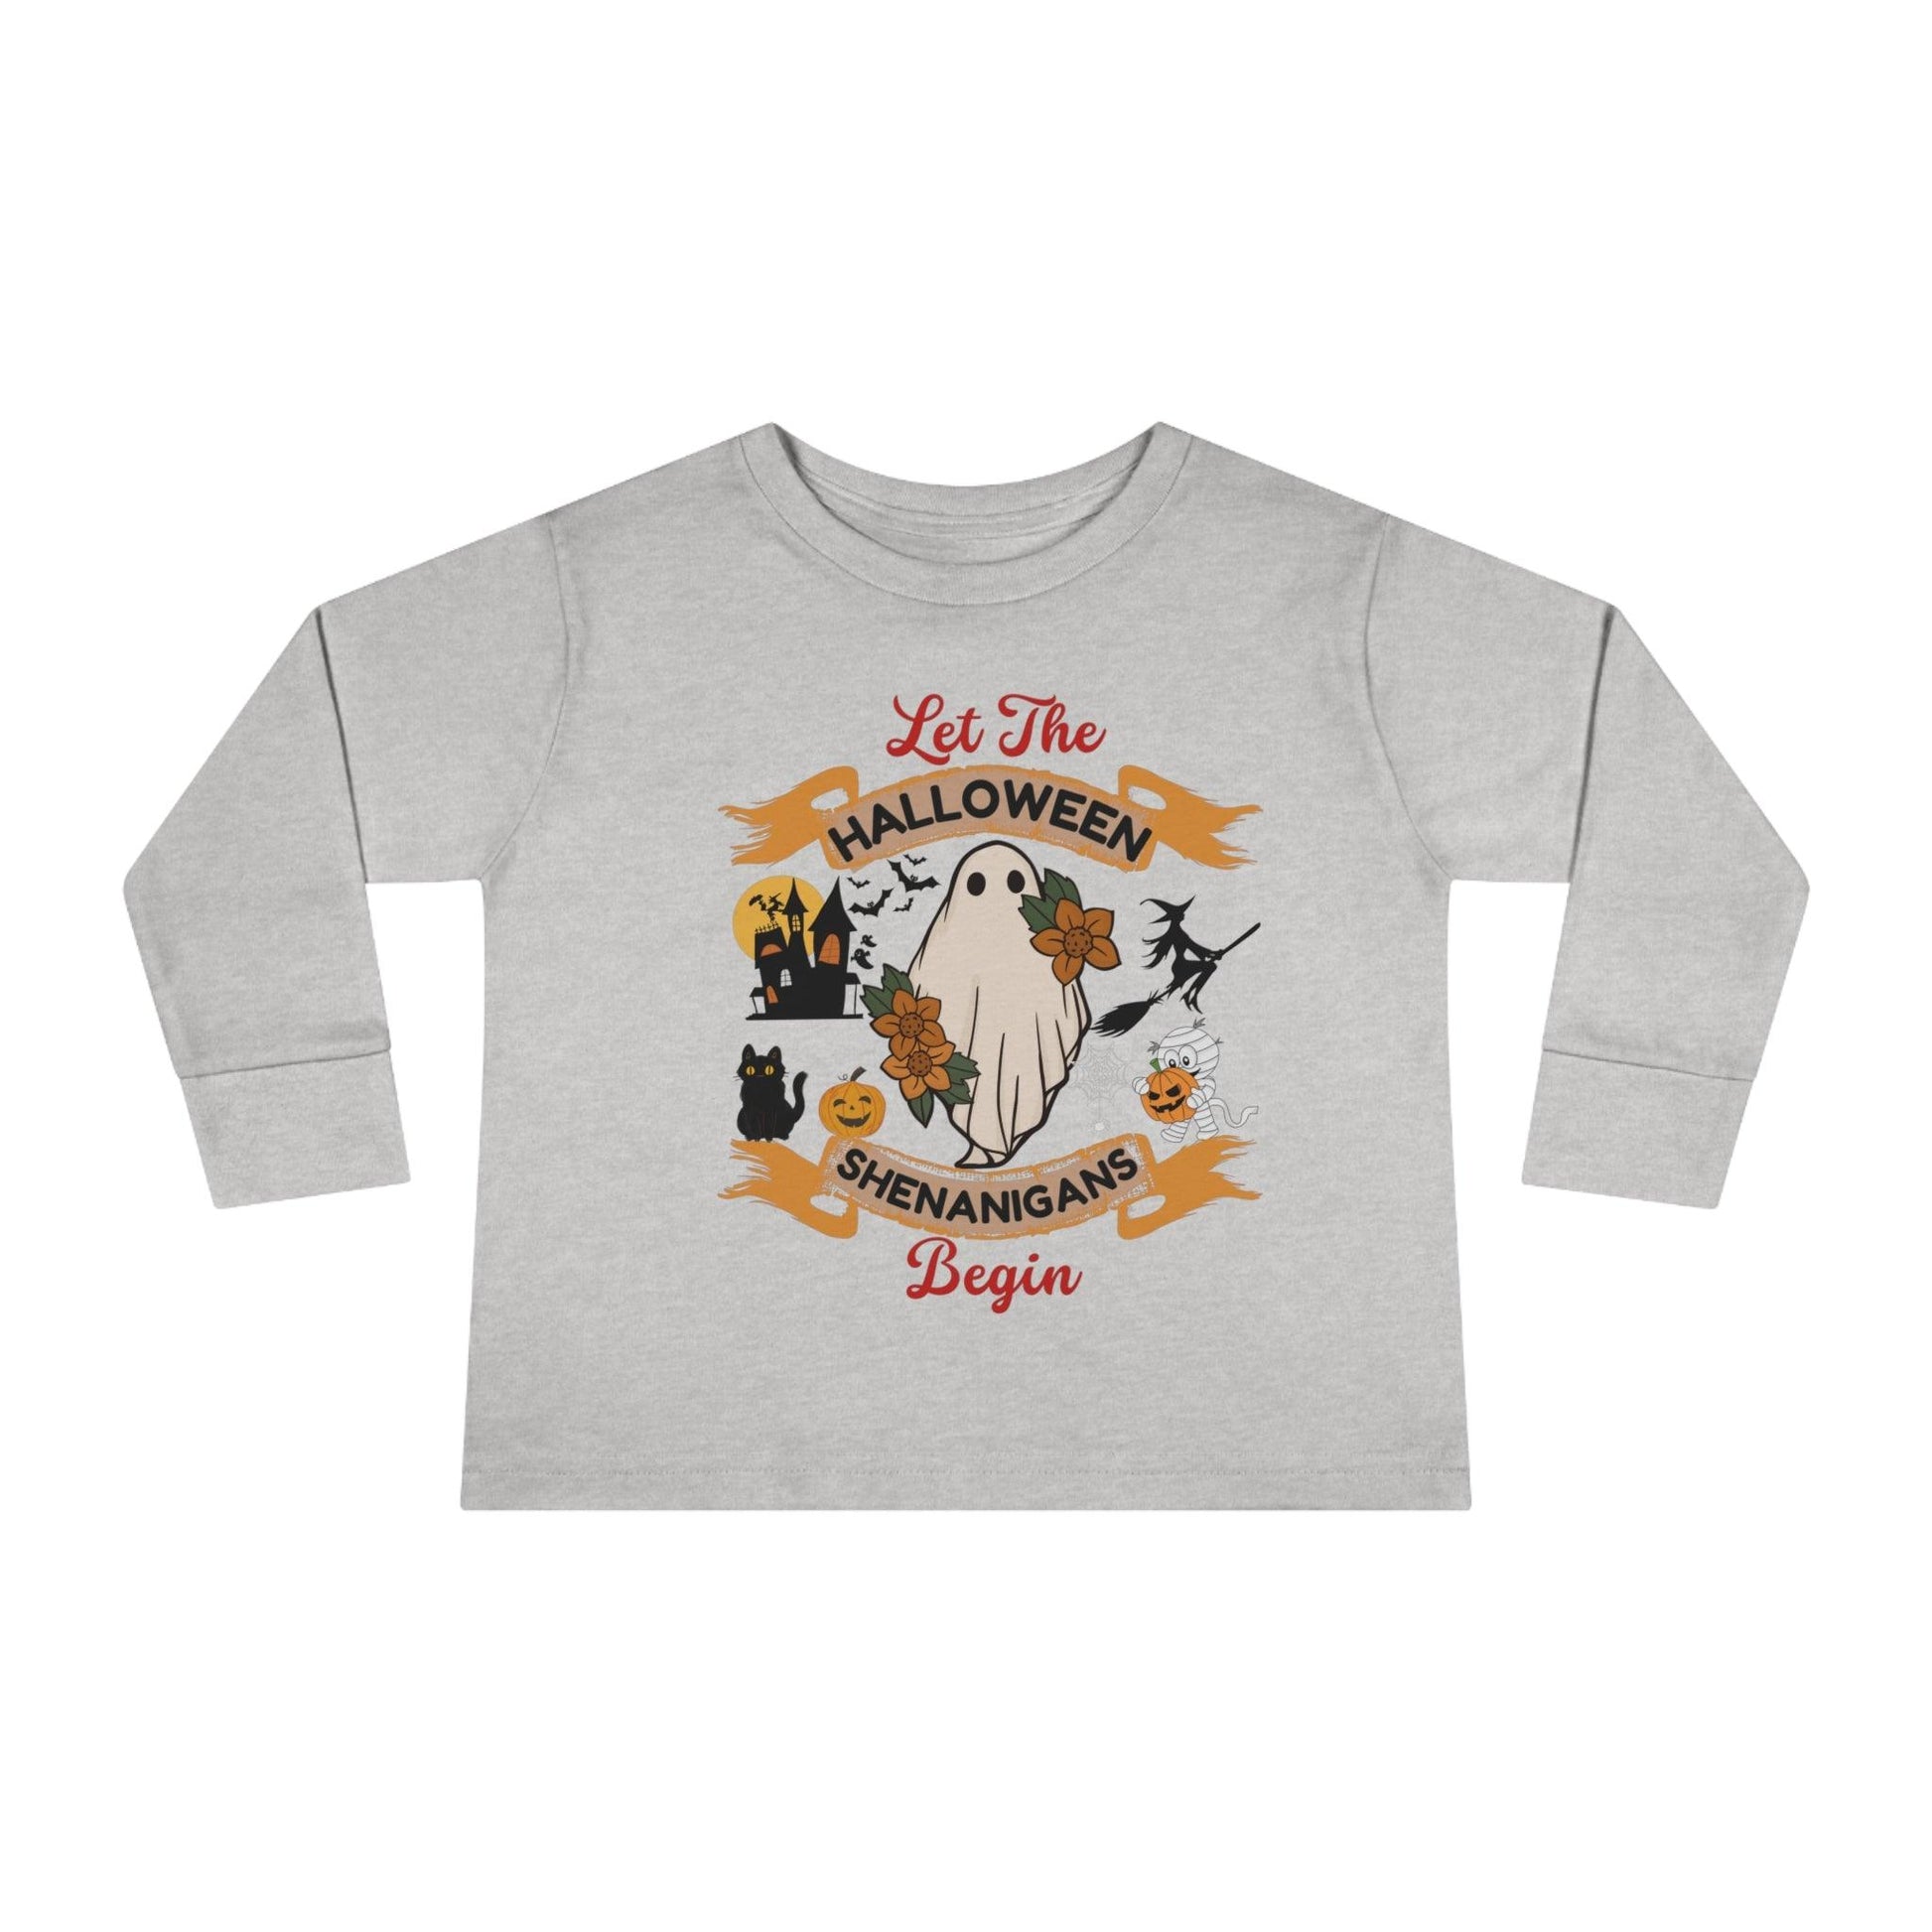 Kids Let the Halloween Shenanigan Begin Shirt Kids Halloween Costume Kids Trick or Treat Outfit for Halloween - Giftsmojo